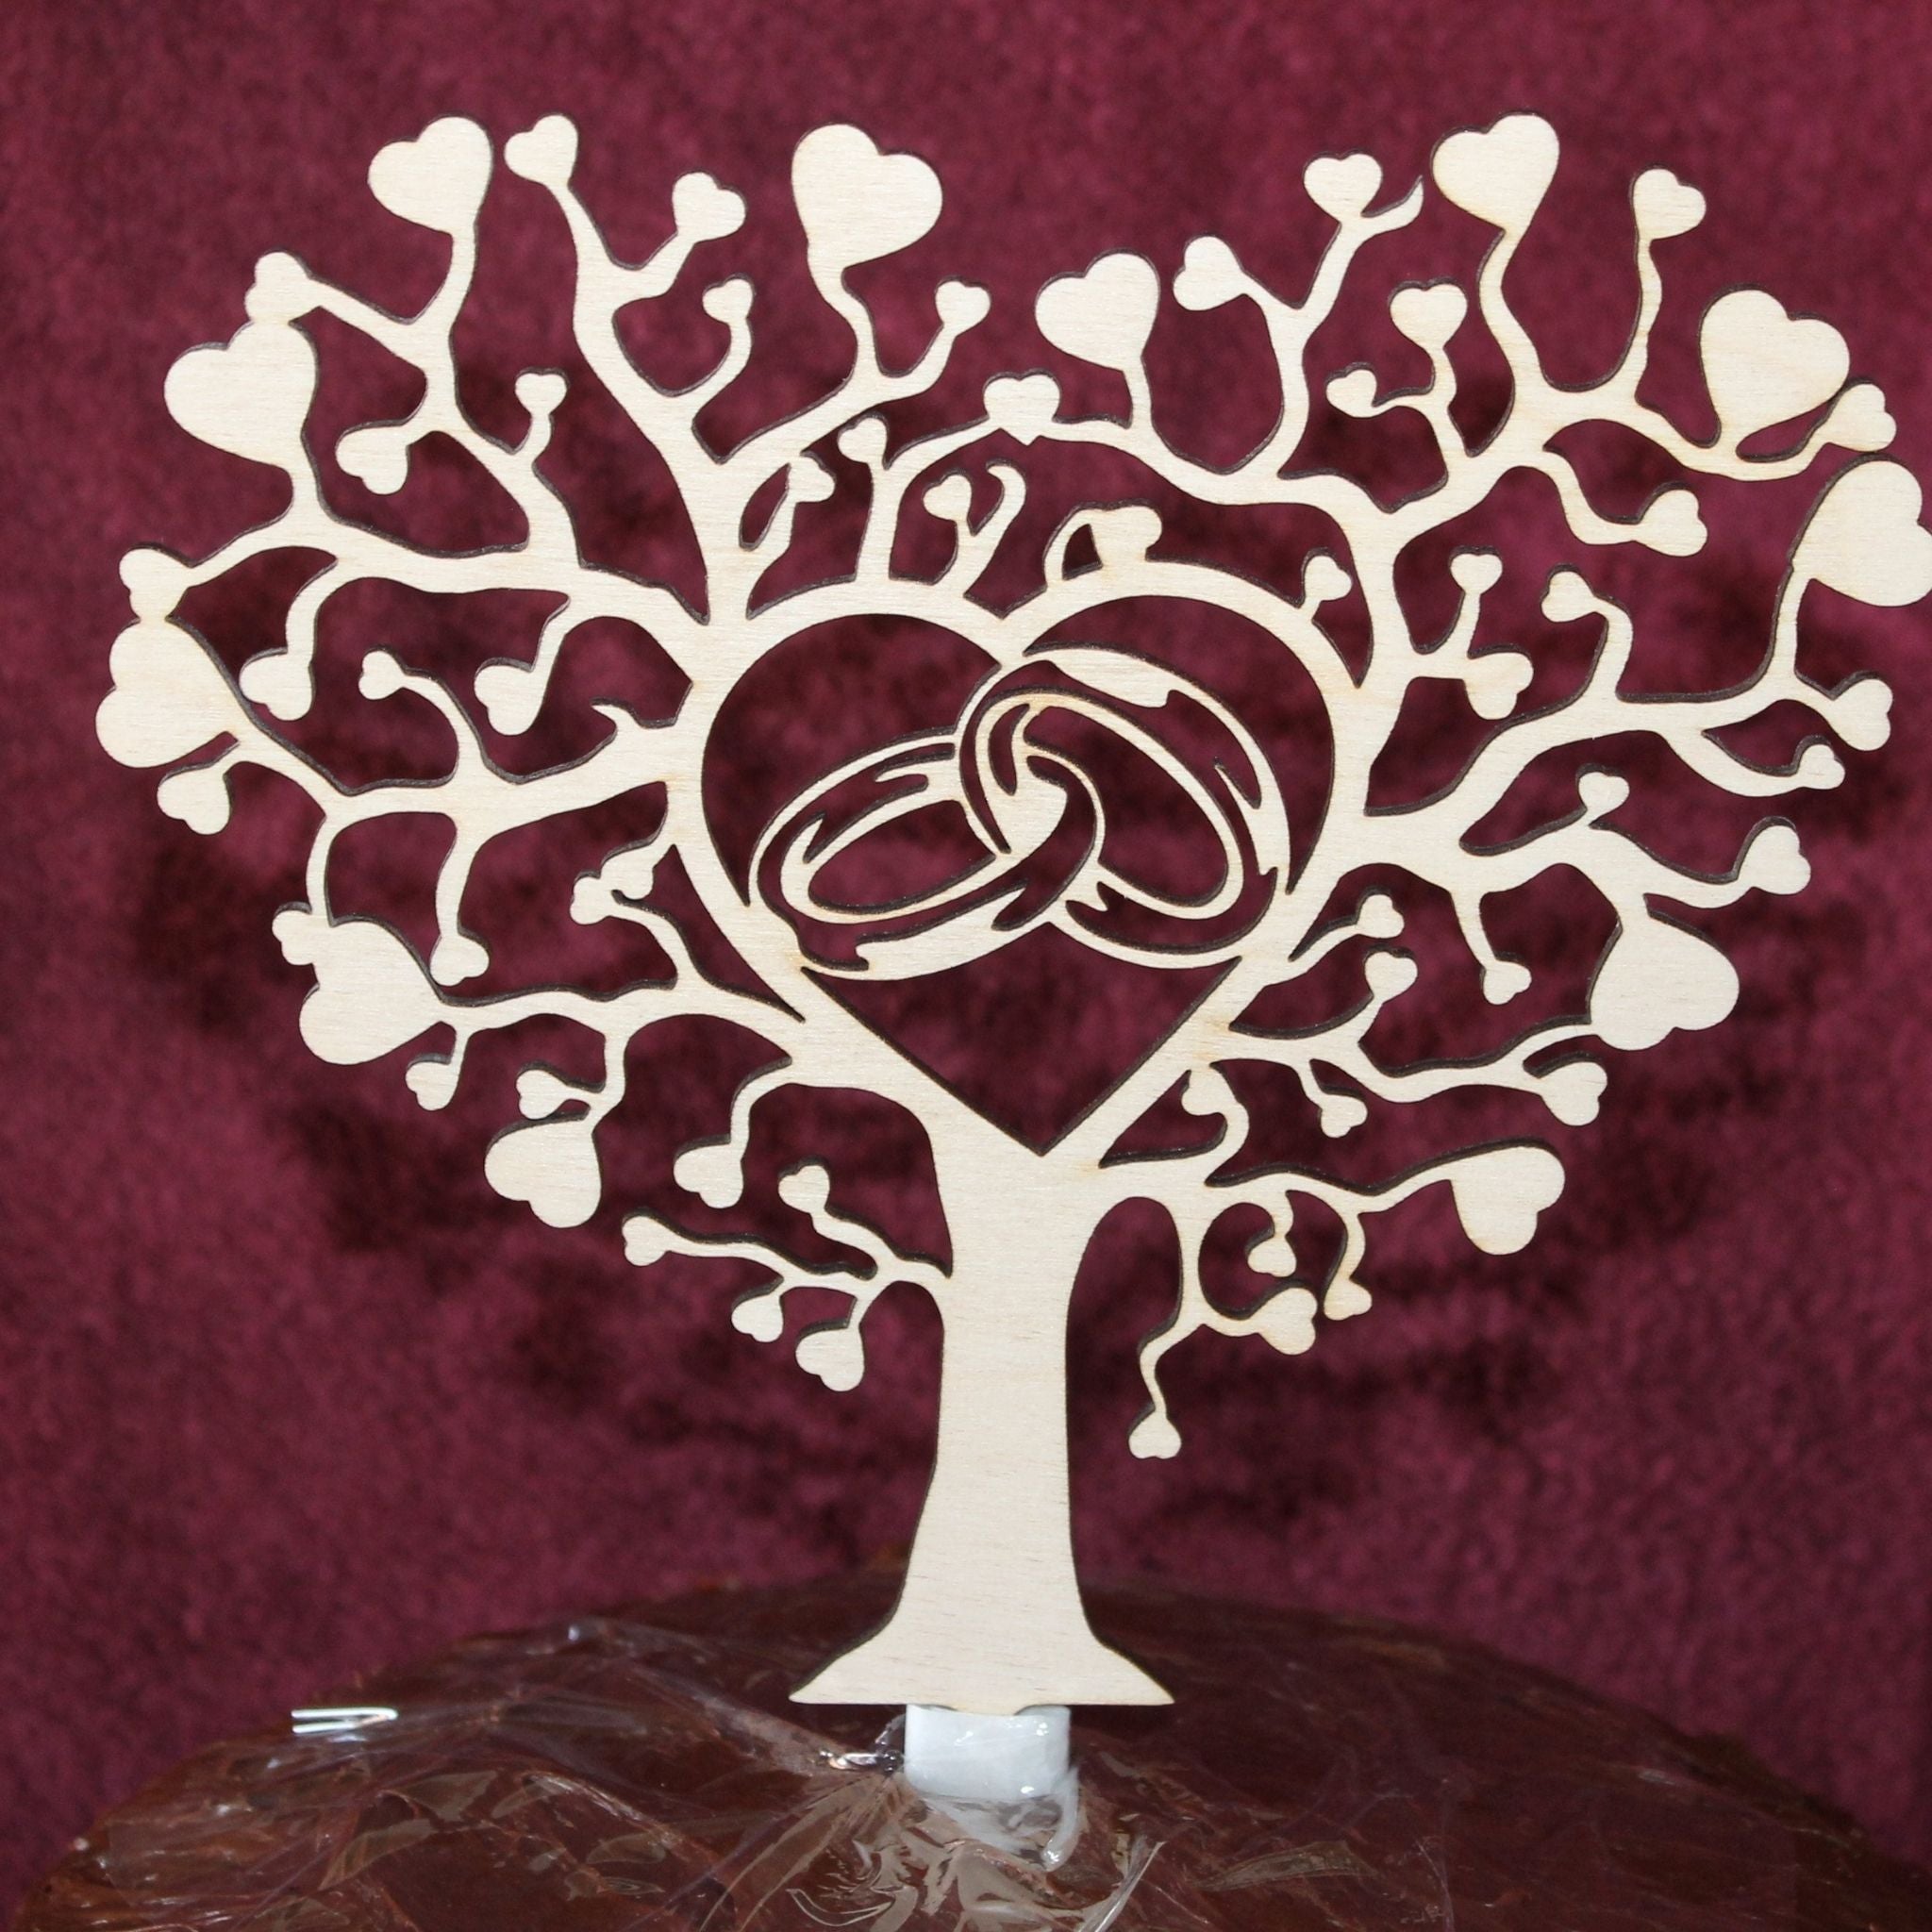 Wooden Rings in a Heart Tree of Life Adult Wedding Cake Topper  Laser  Engraved Engagement Announcement Celebration Decor Made in the USA – Kustom  Wood Creations